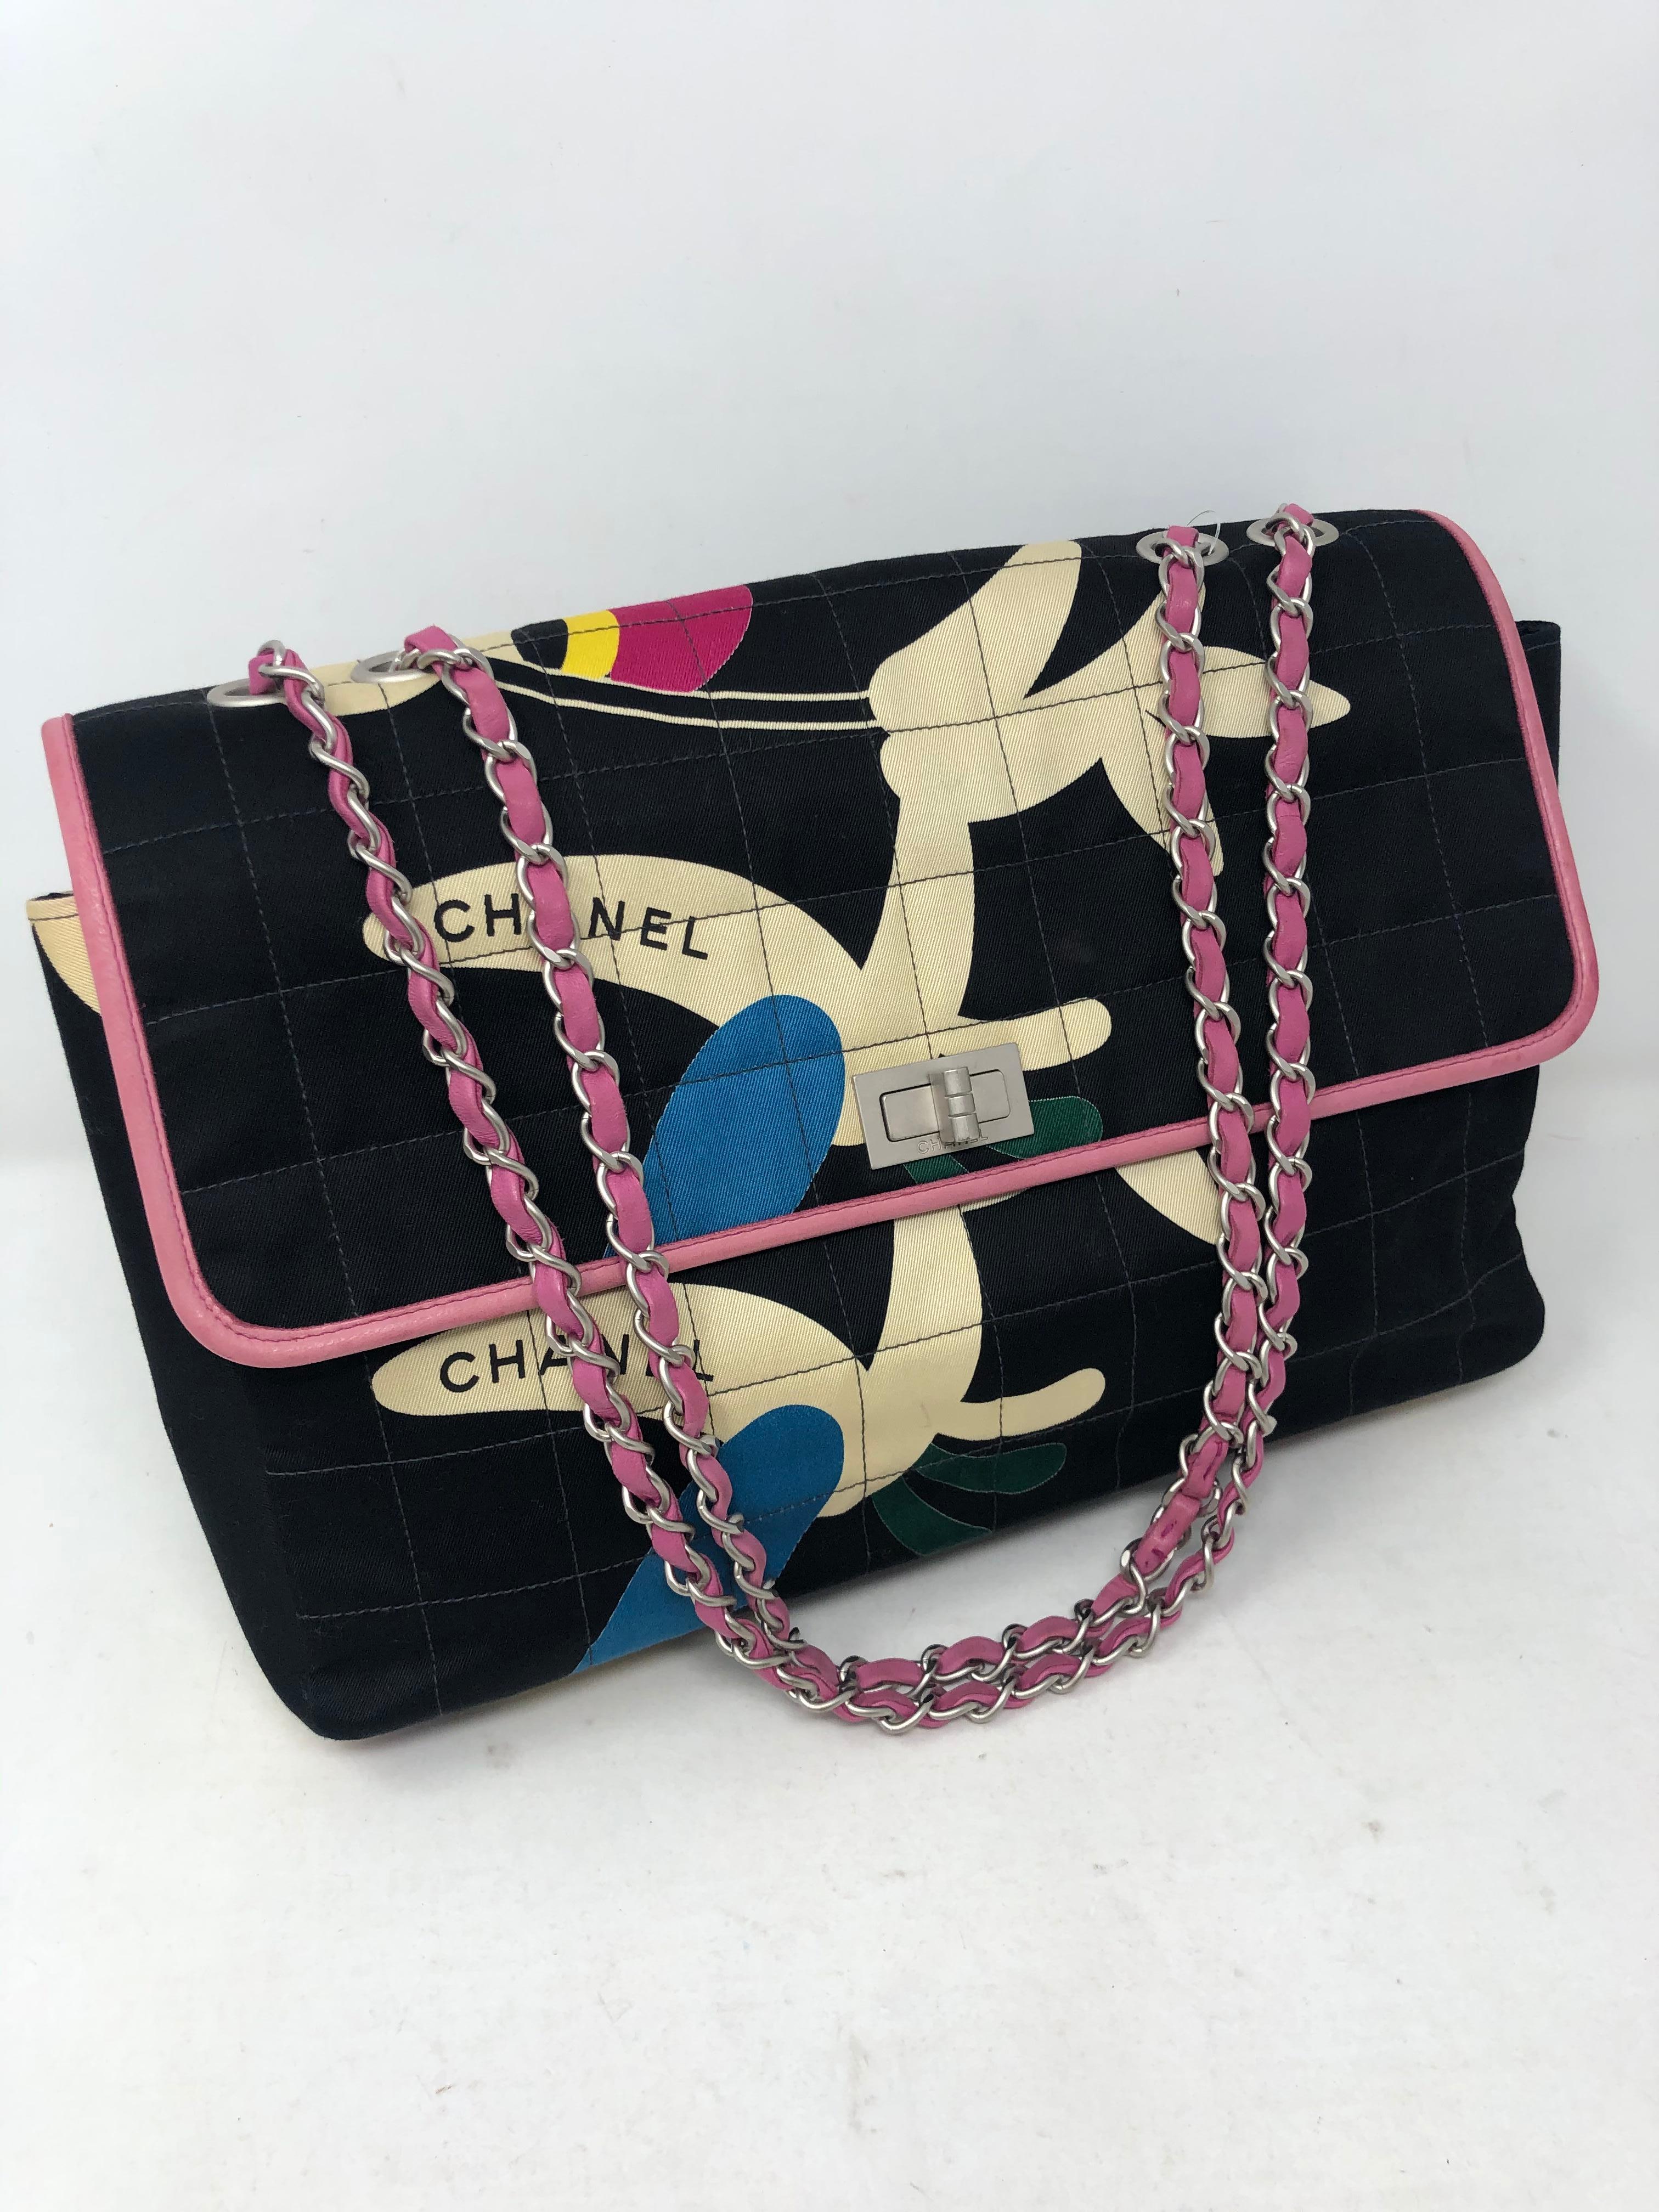 Chanel Cotton Flap Bag with Black, Pink, Blue, Yellow. From 2000-2002 Spring Collection. Good condition. Pink leather straps with silver chain. Includes authenticity card. Serial number inside bag. Guaranteed authentic. 